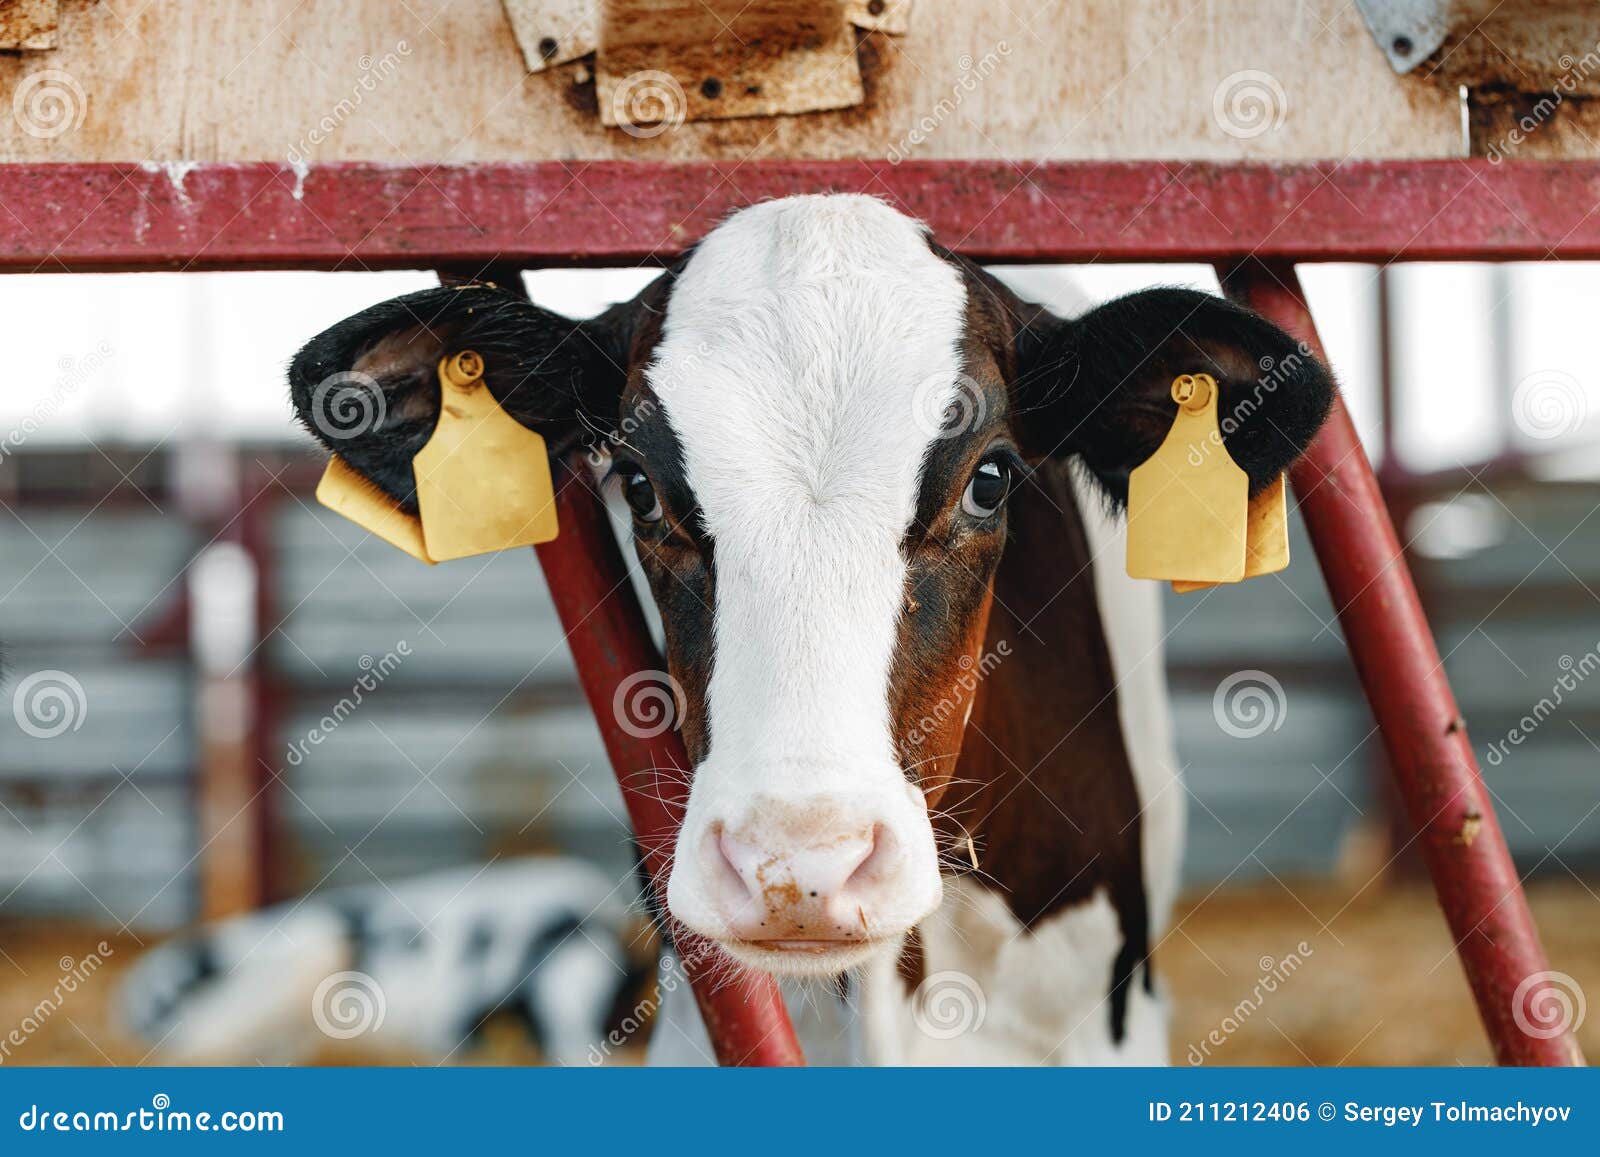 Young Bull Calf in a Stall on a Farm Stock Photo - Image of breeding ...